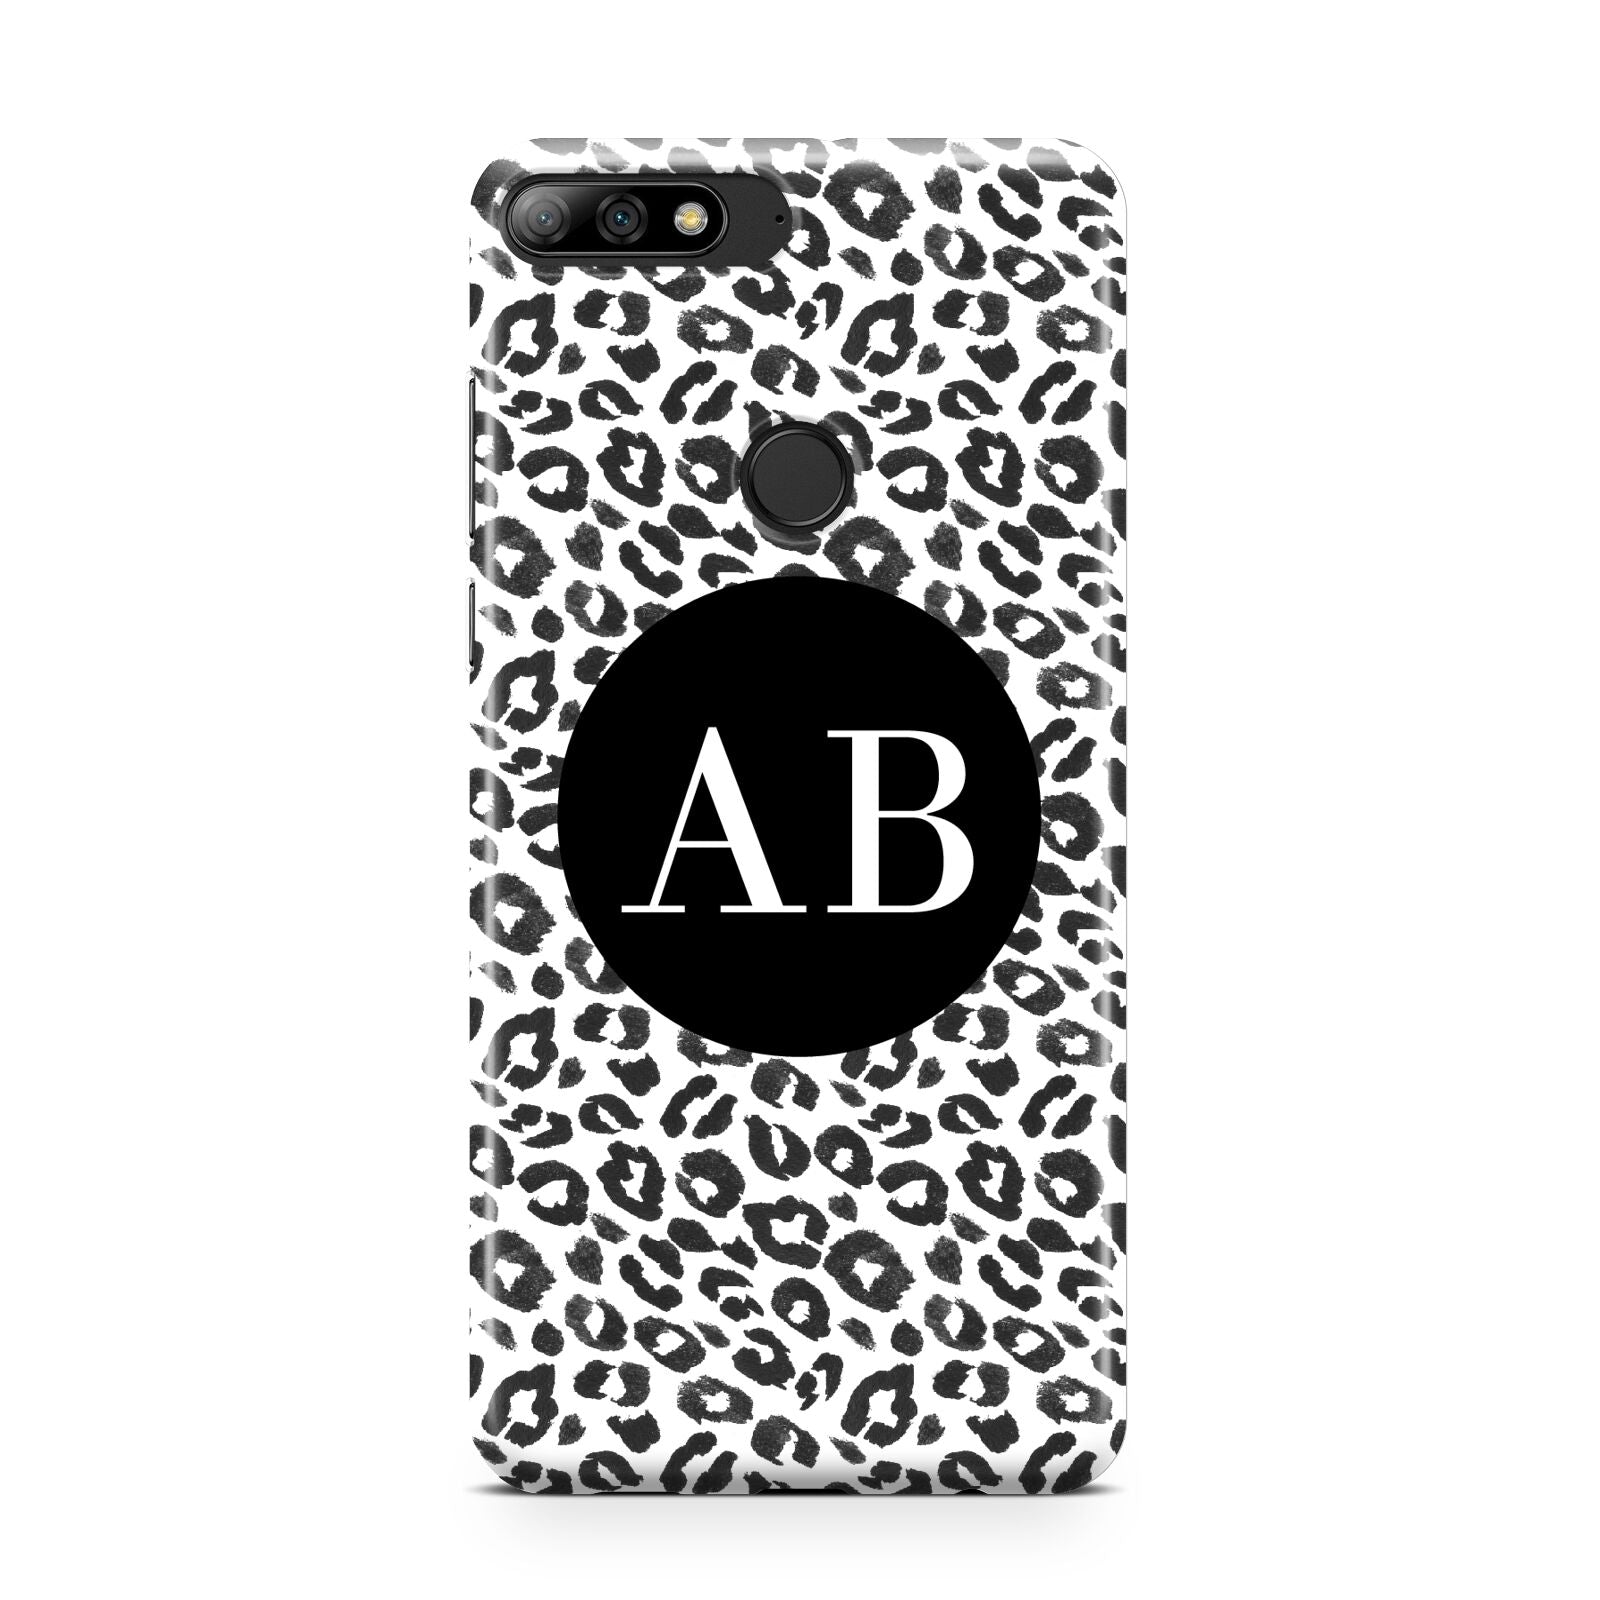 Leopard Print Black and White Huawei Y7 2018